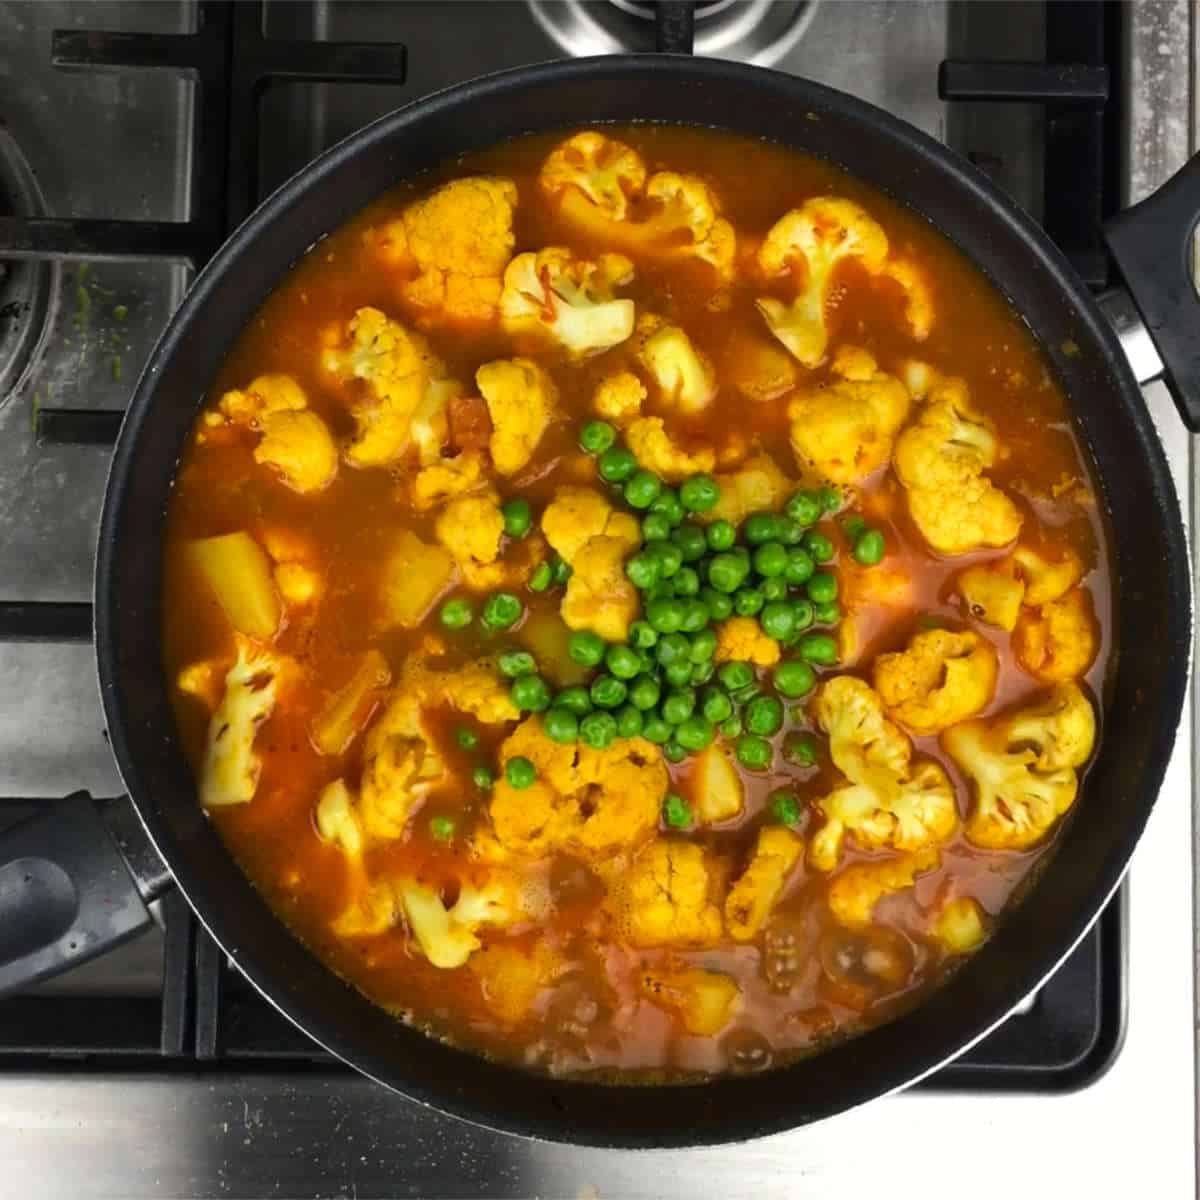 Add cauliflower and peas, and simmer until done.